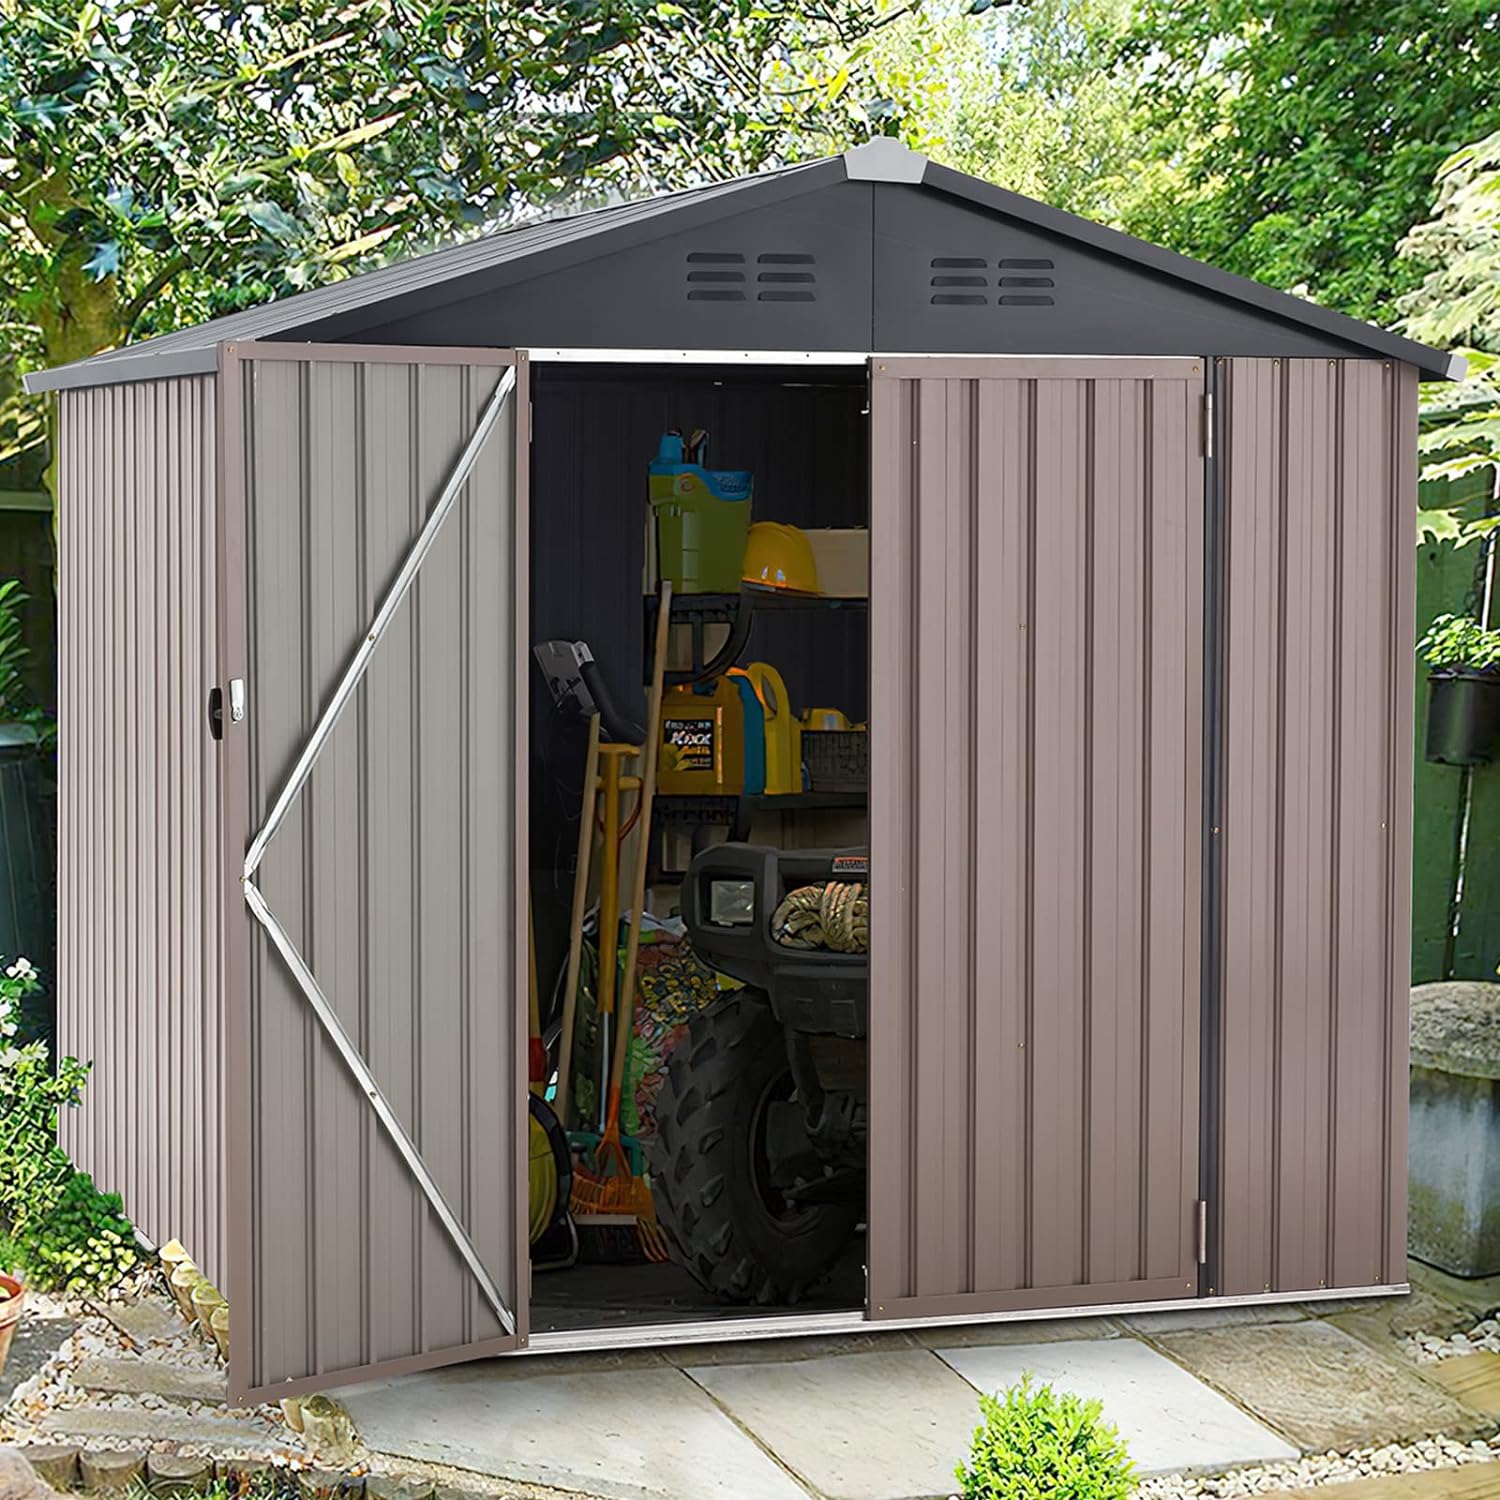 AECOJOY 7' x 7' Metal Storage Shed for Outdoor, Outdoor Storage Shed with Design of Lockable Doors, Utility and Tool Storage for Garden, Backyard, Patio, Outside use.